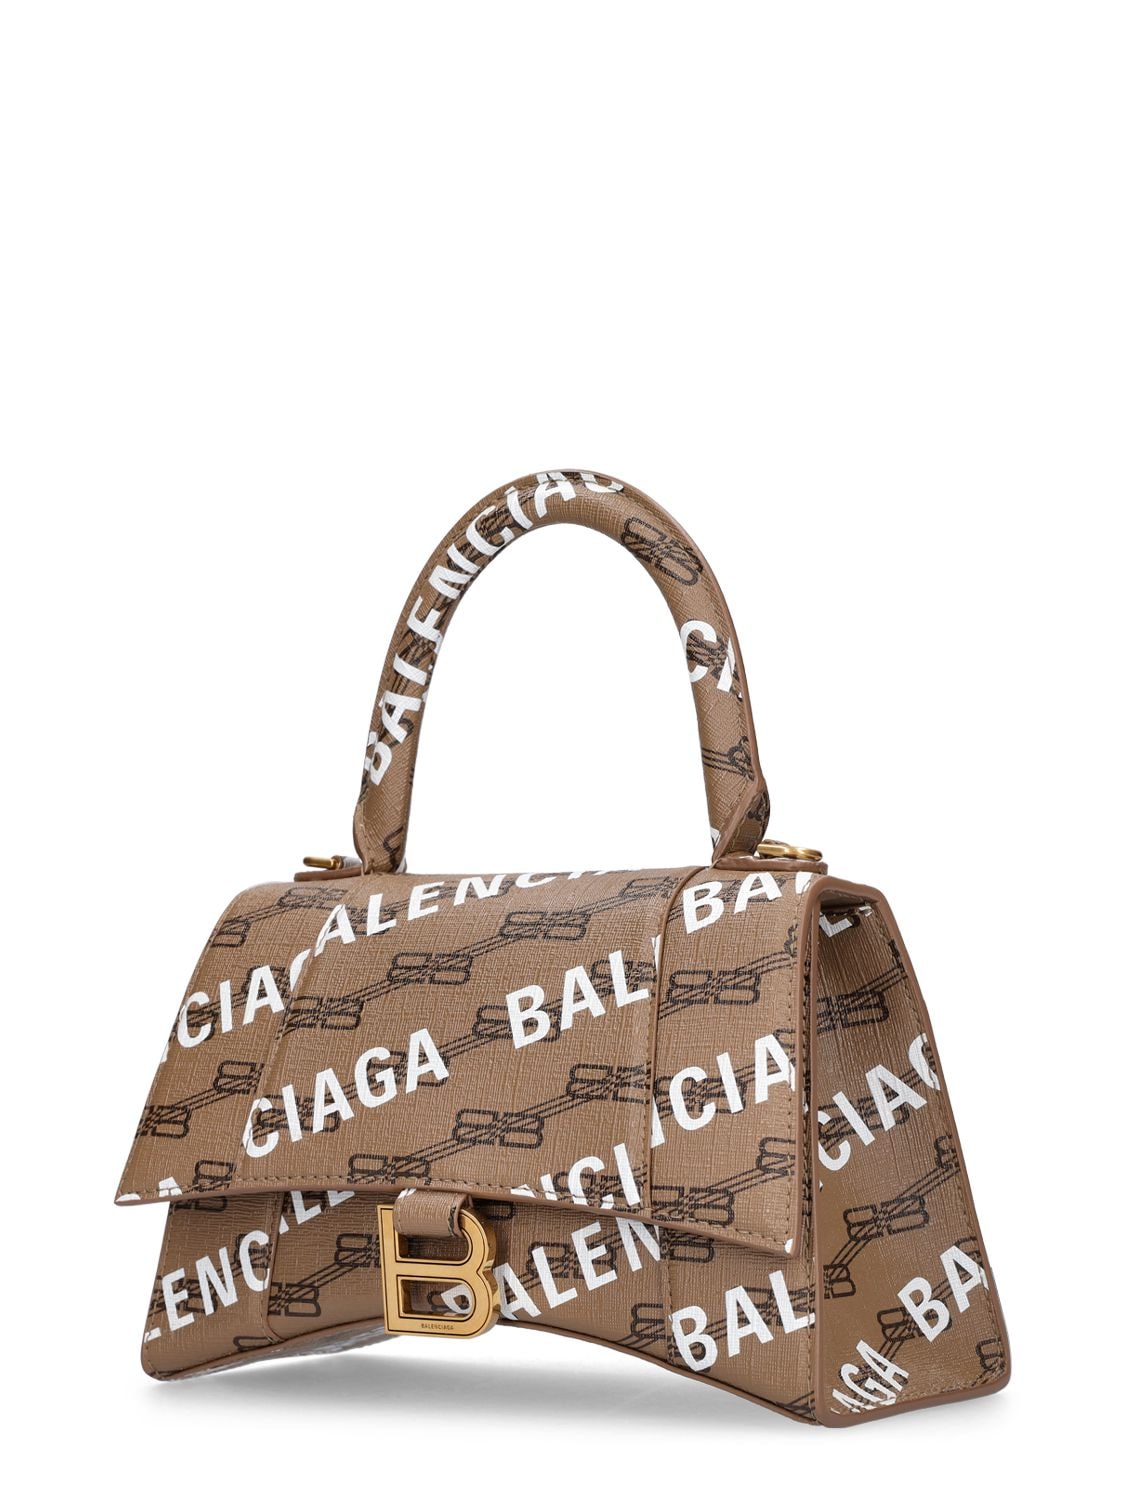 Balenciaga S Hourglass Coated Canvas Bag In Brown